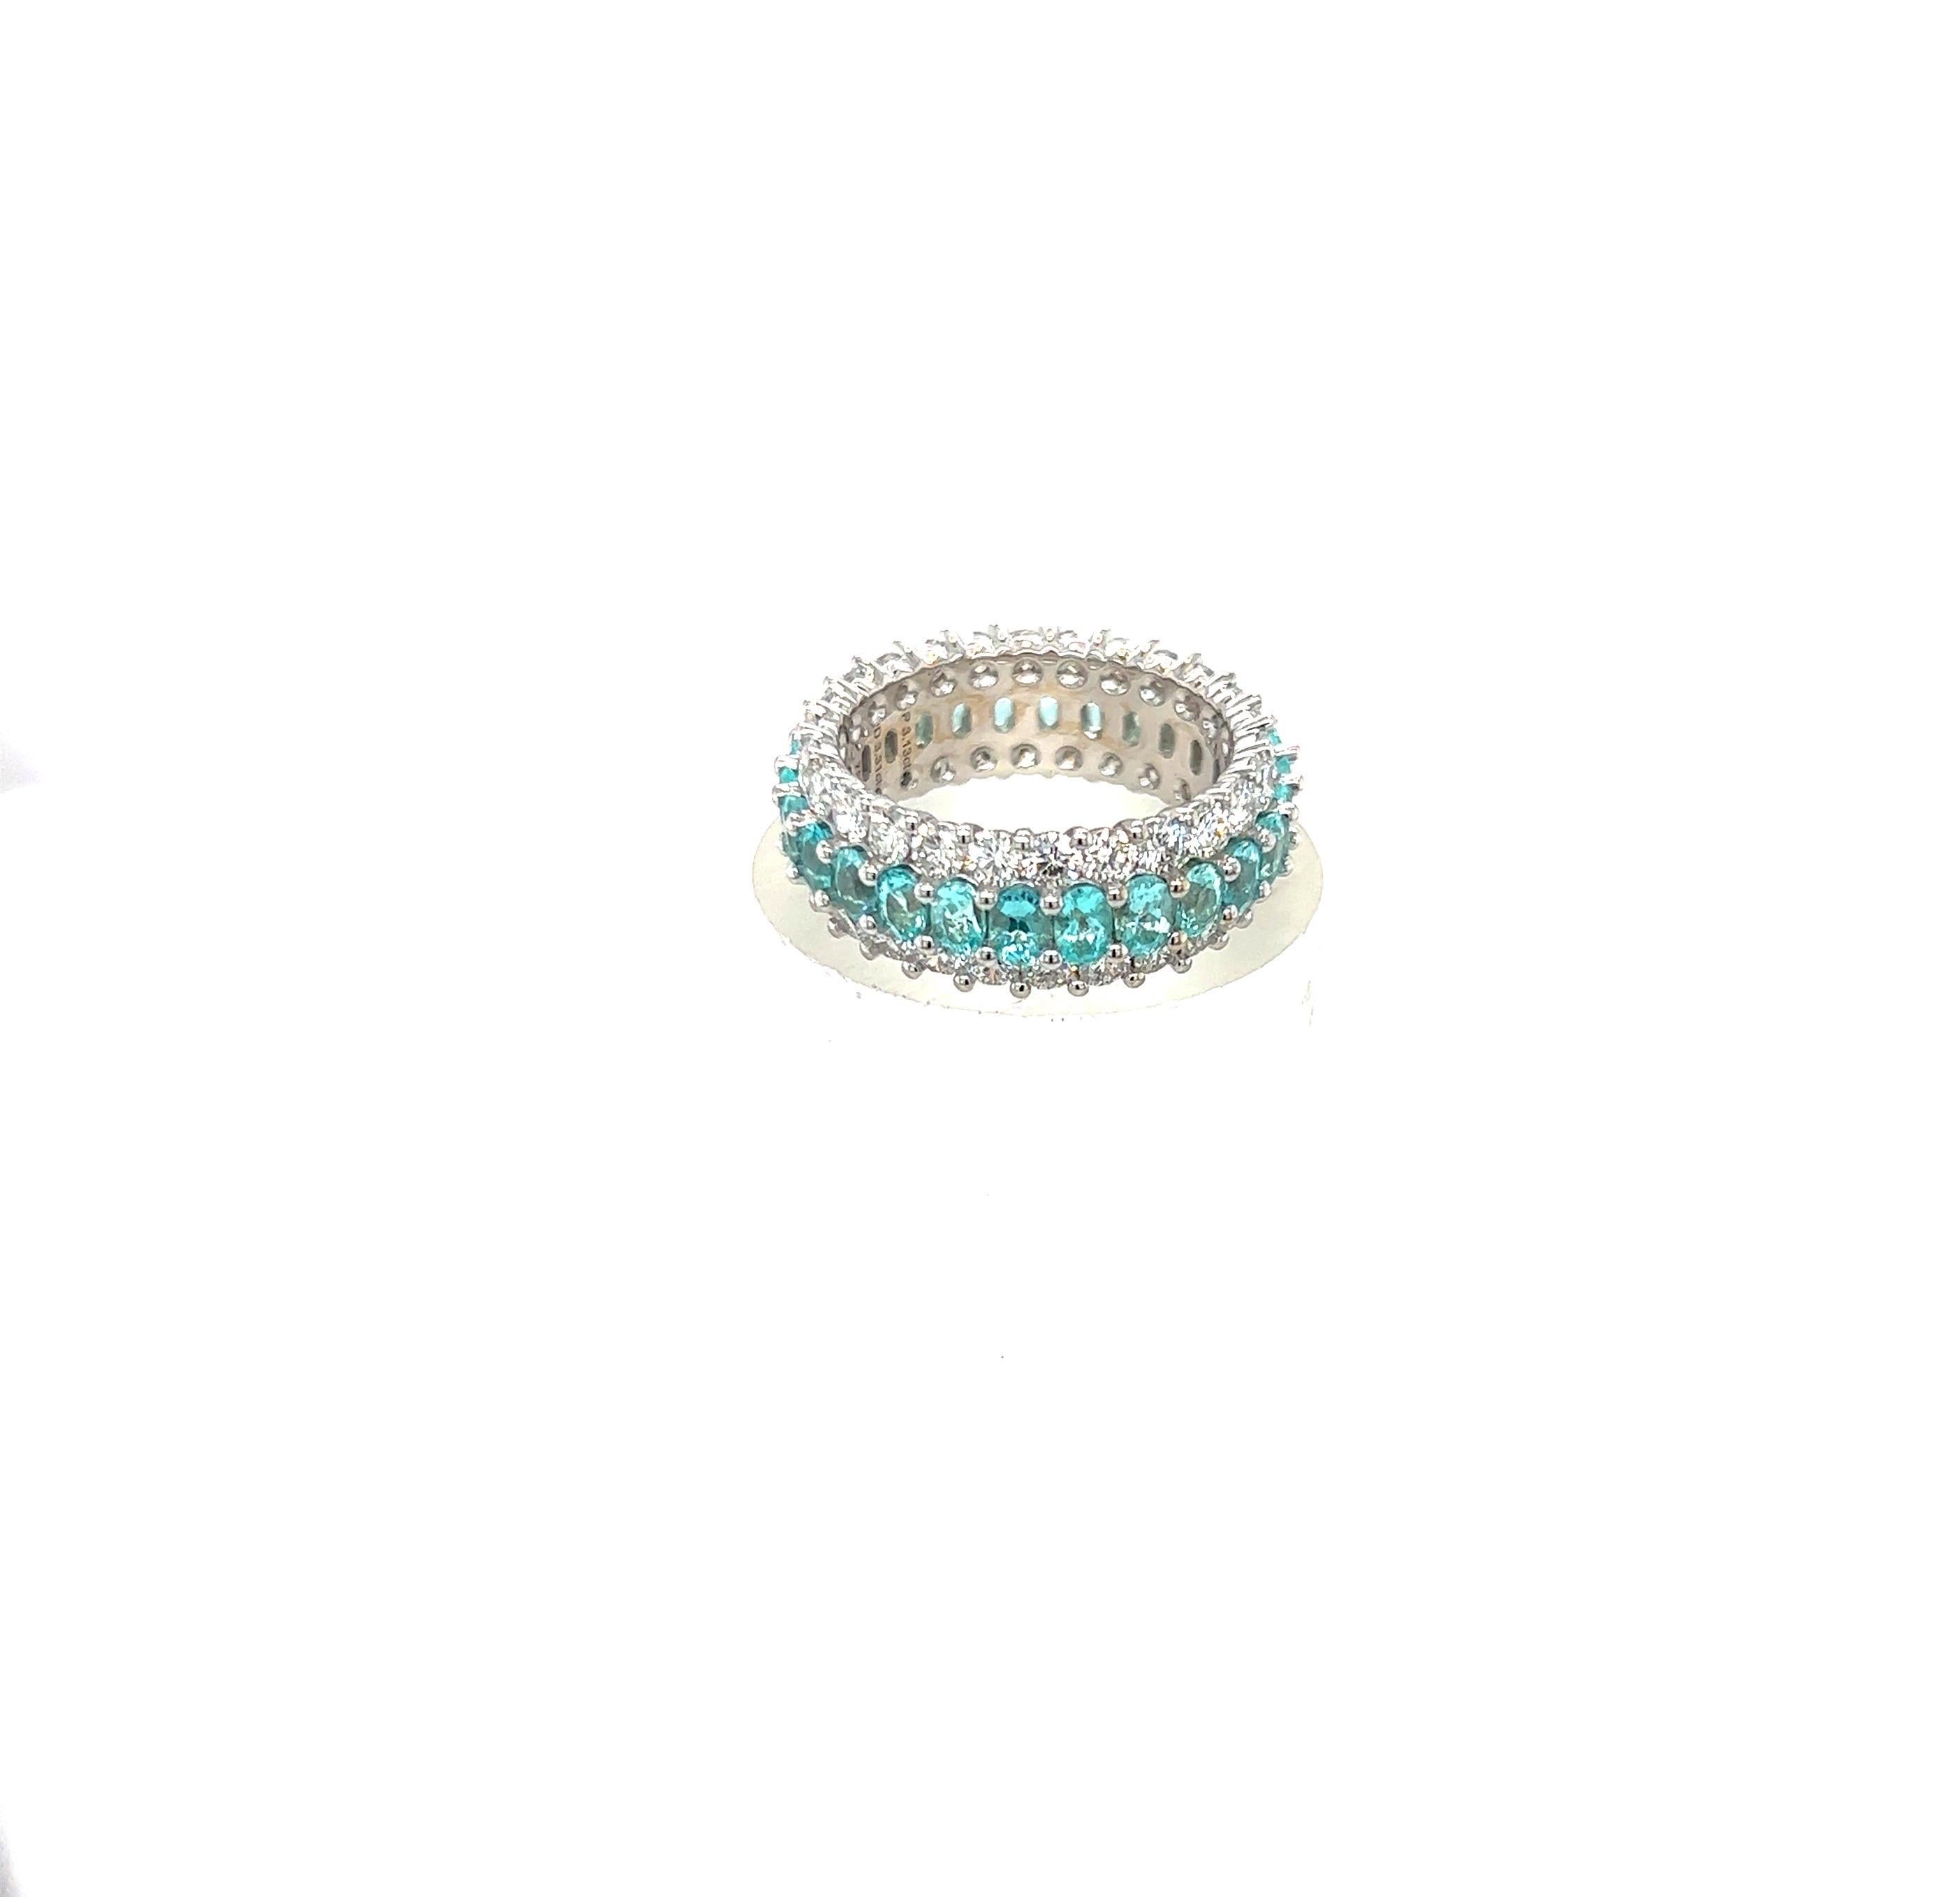 Magnificent 18 karat white gold band set with  a center row of 26 Oval Blue Tourmalines and  2 rows of 52 Round Brilliant Diamonds.
Blue Tourmalines = 3.13 carats
Diamonds =3.31 carats
Ring size 7.5